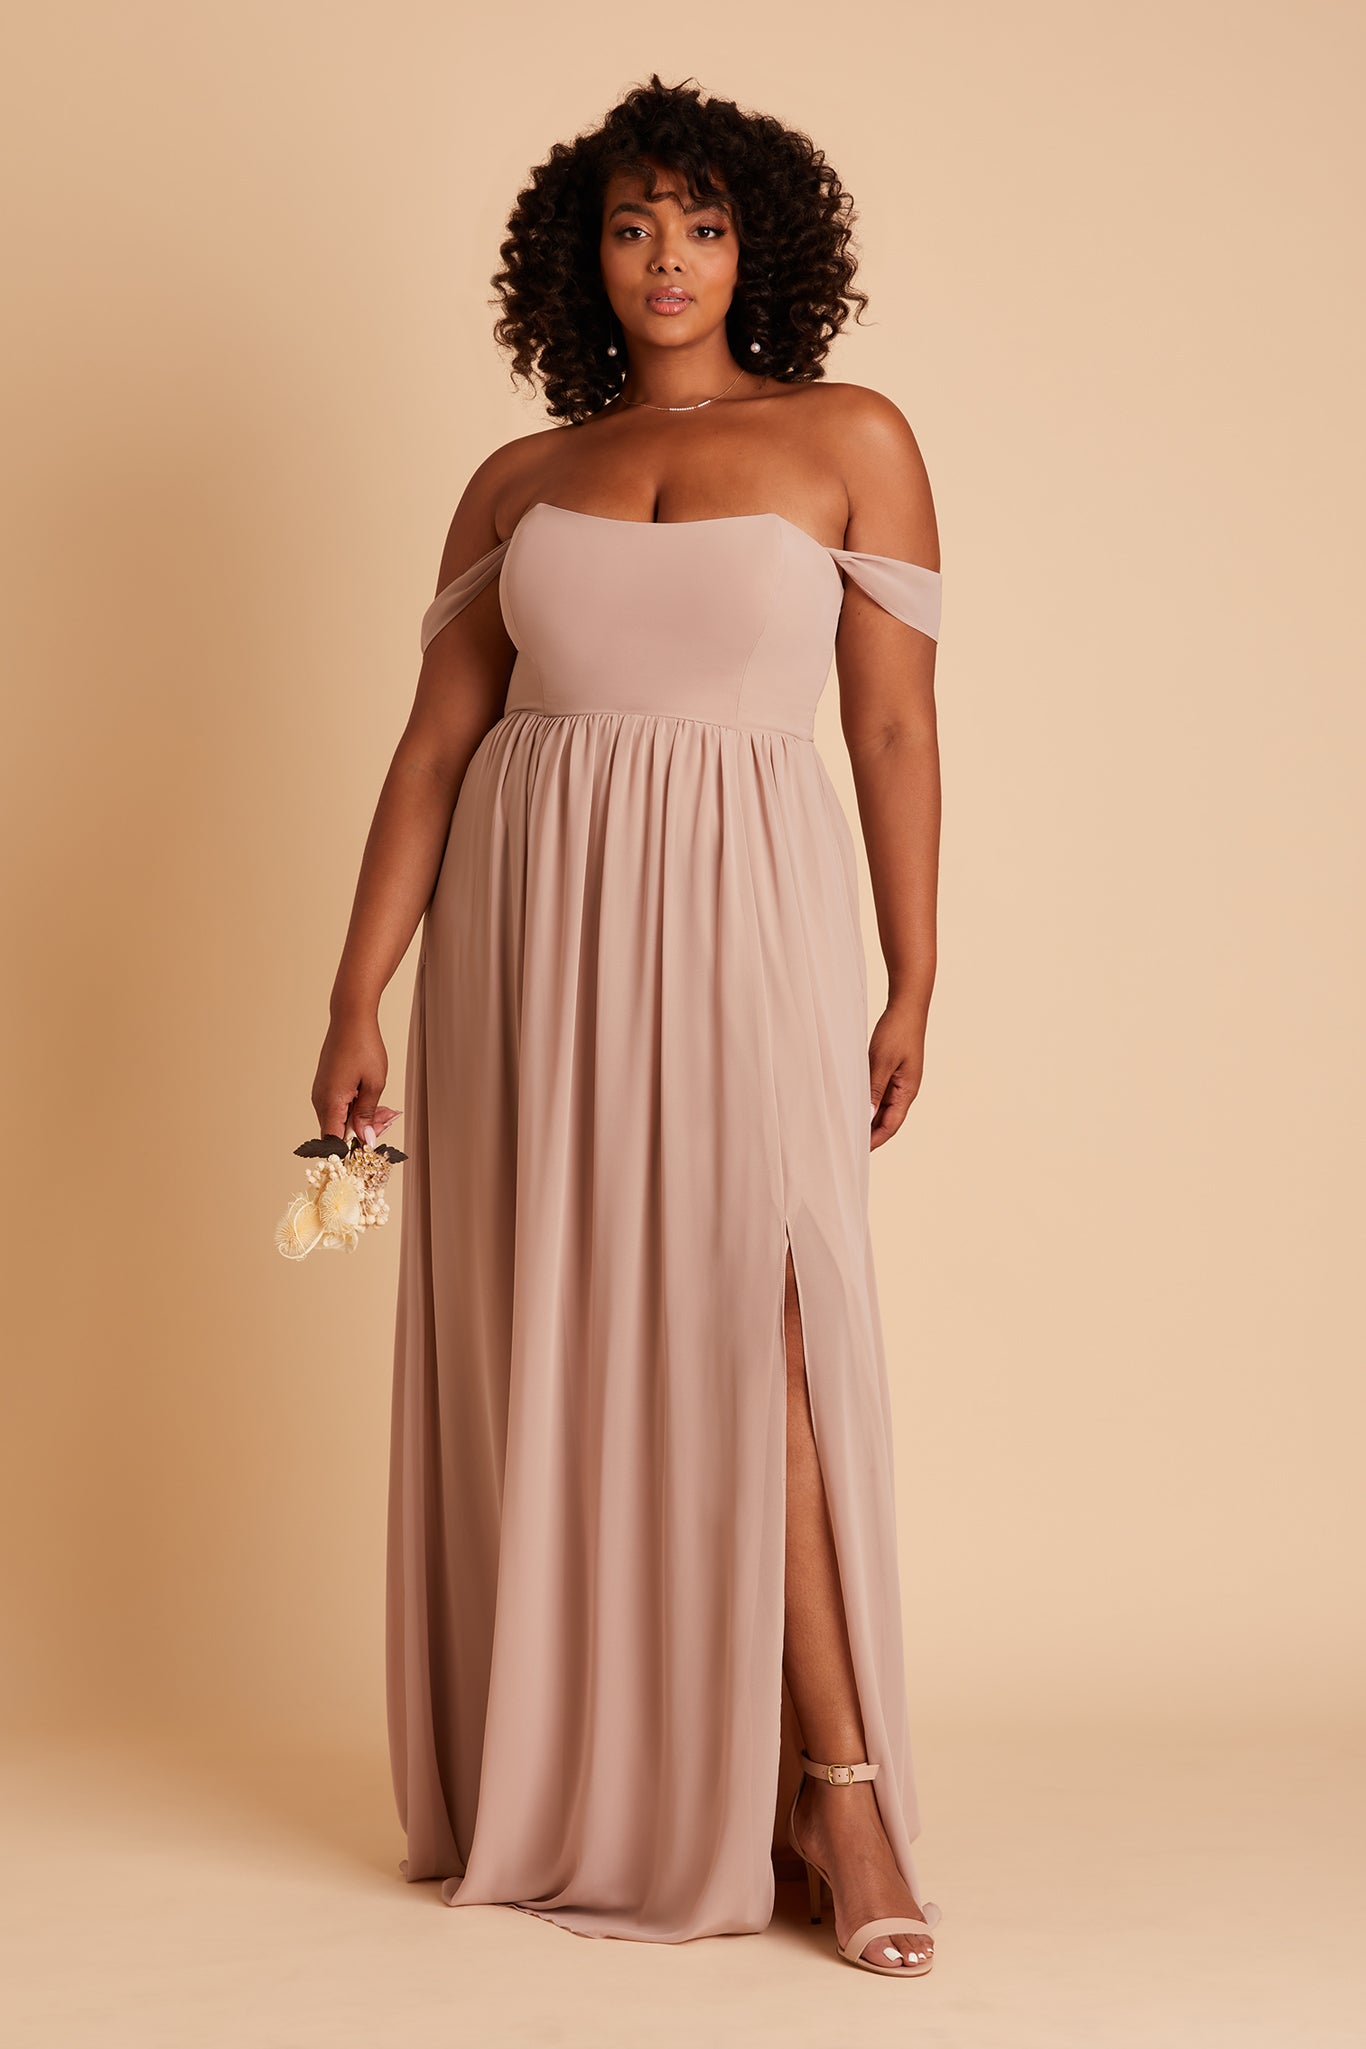 August Convertible Dress - Taupe